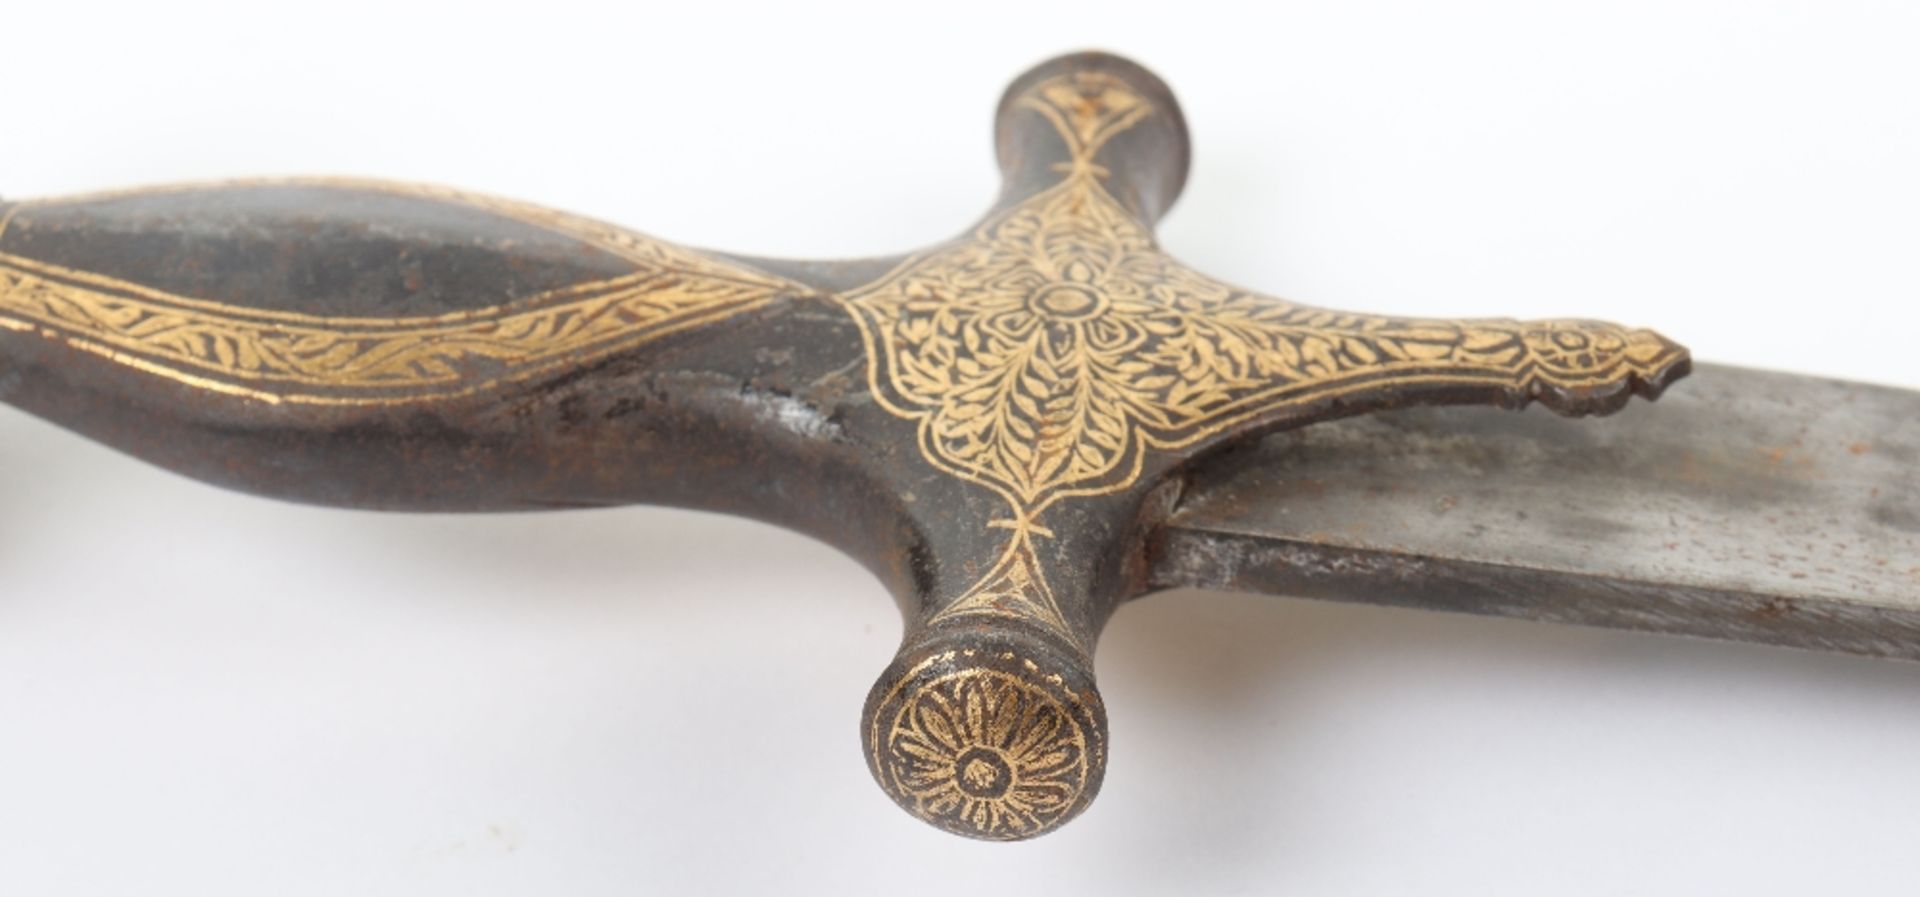 Decorative Indian Sword Tulwar Perhaps for a Youth - Image 10 of 13